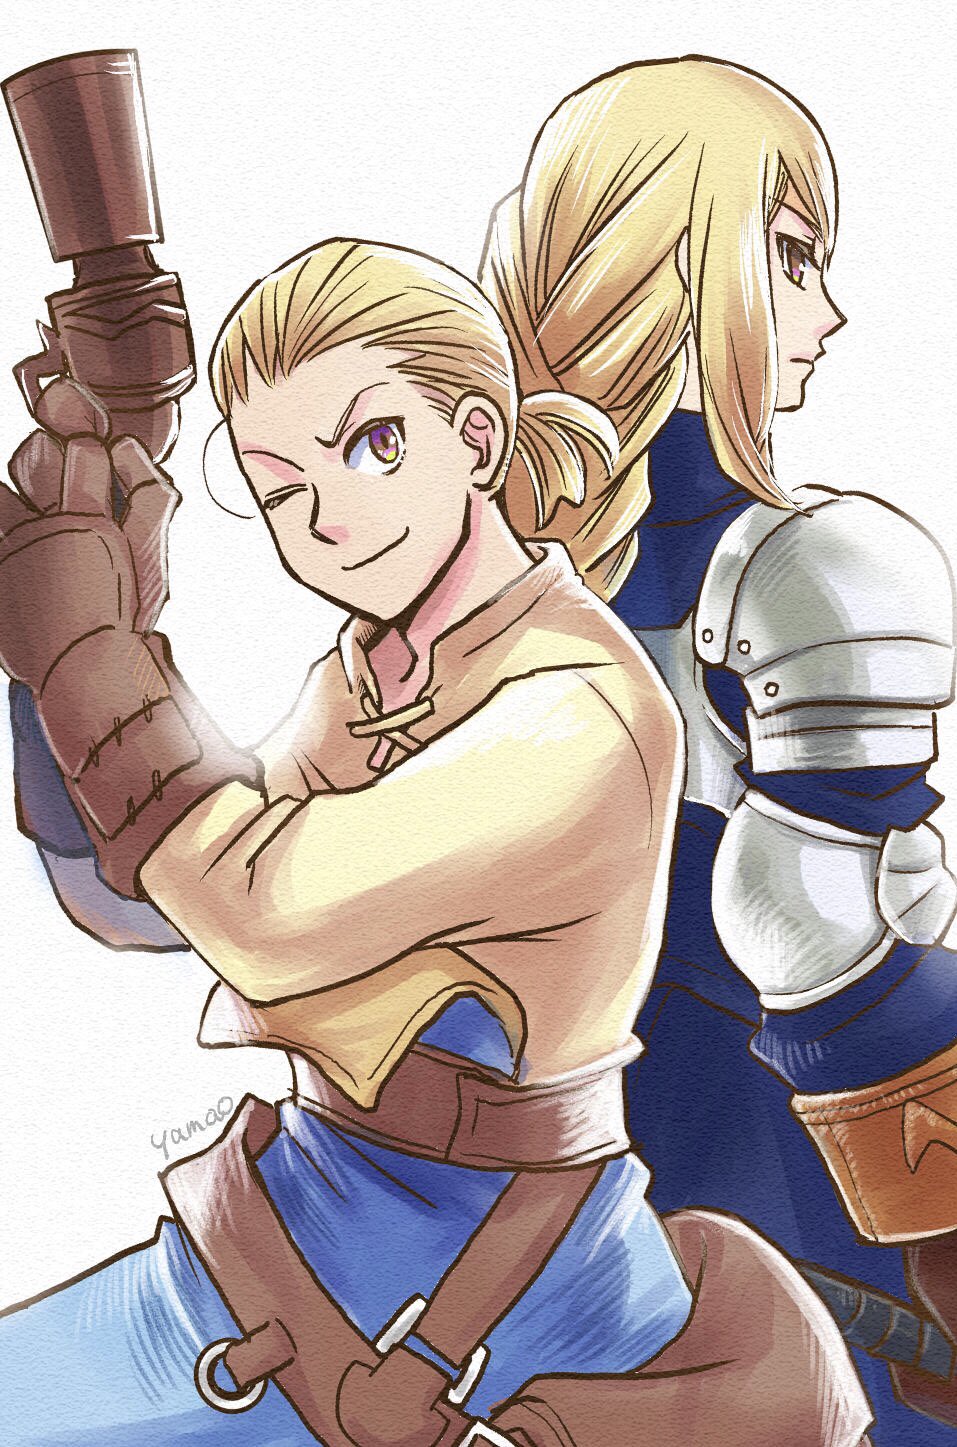 1boy 1girl agrias_oaks armor artist_name back-to-back belt blonde_hair blue_pants braid breastplate brown_gloves final_fantasy final_fantasy_tactics gloves gun highres holding holding_weapon looking_at_viewer mustadio_bunansa nose one_eye_closed pants ponytail shirt shoulder_armor simple_background smile sword upper_body weapon yamao105 yellow_eyes yellow_shirt